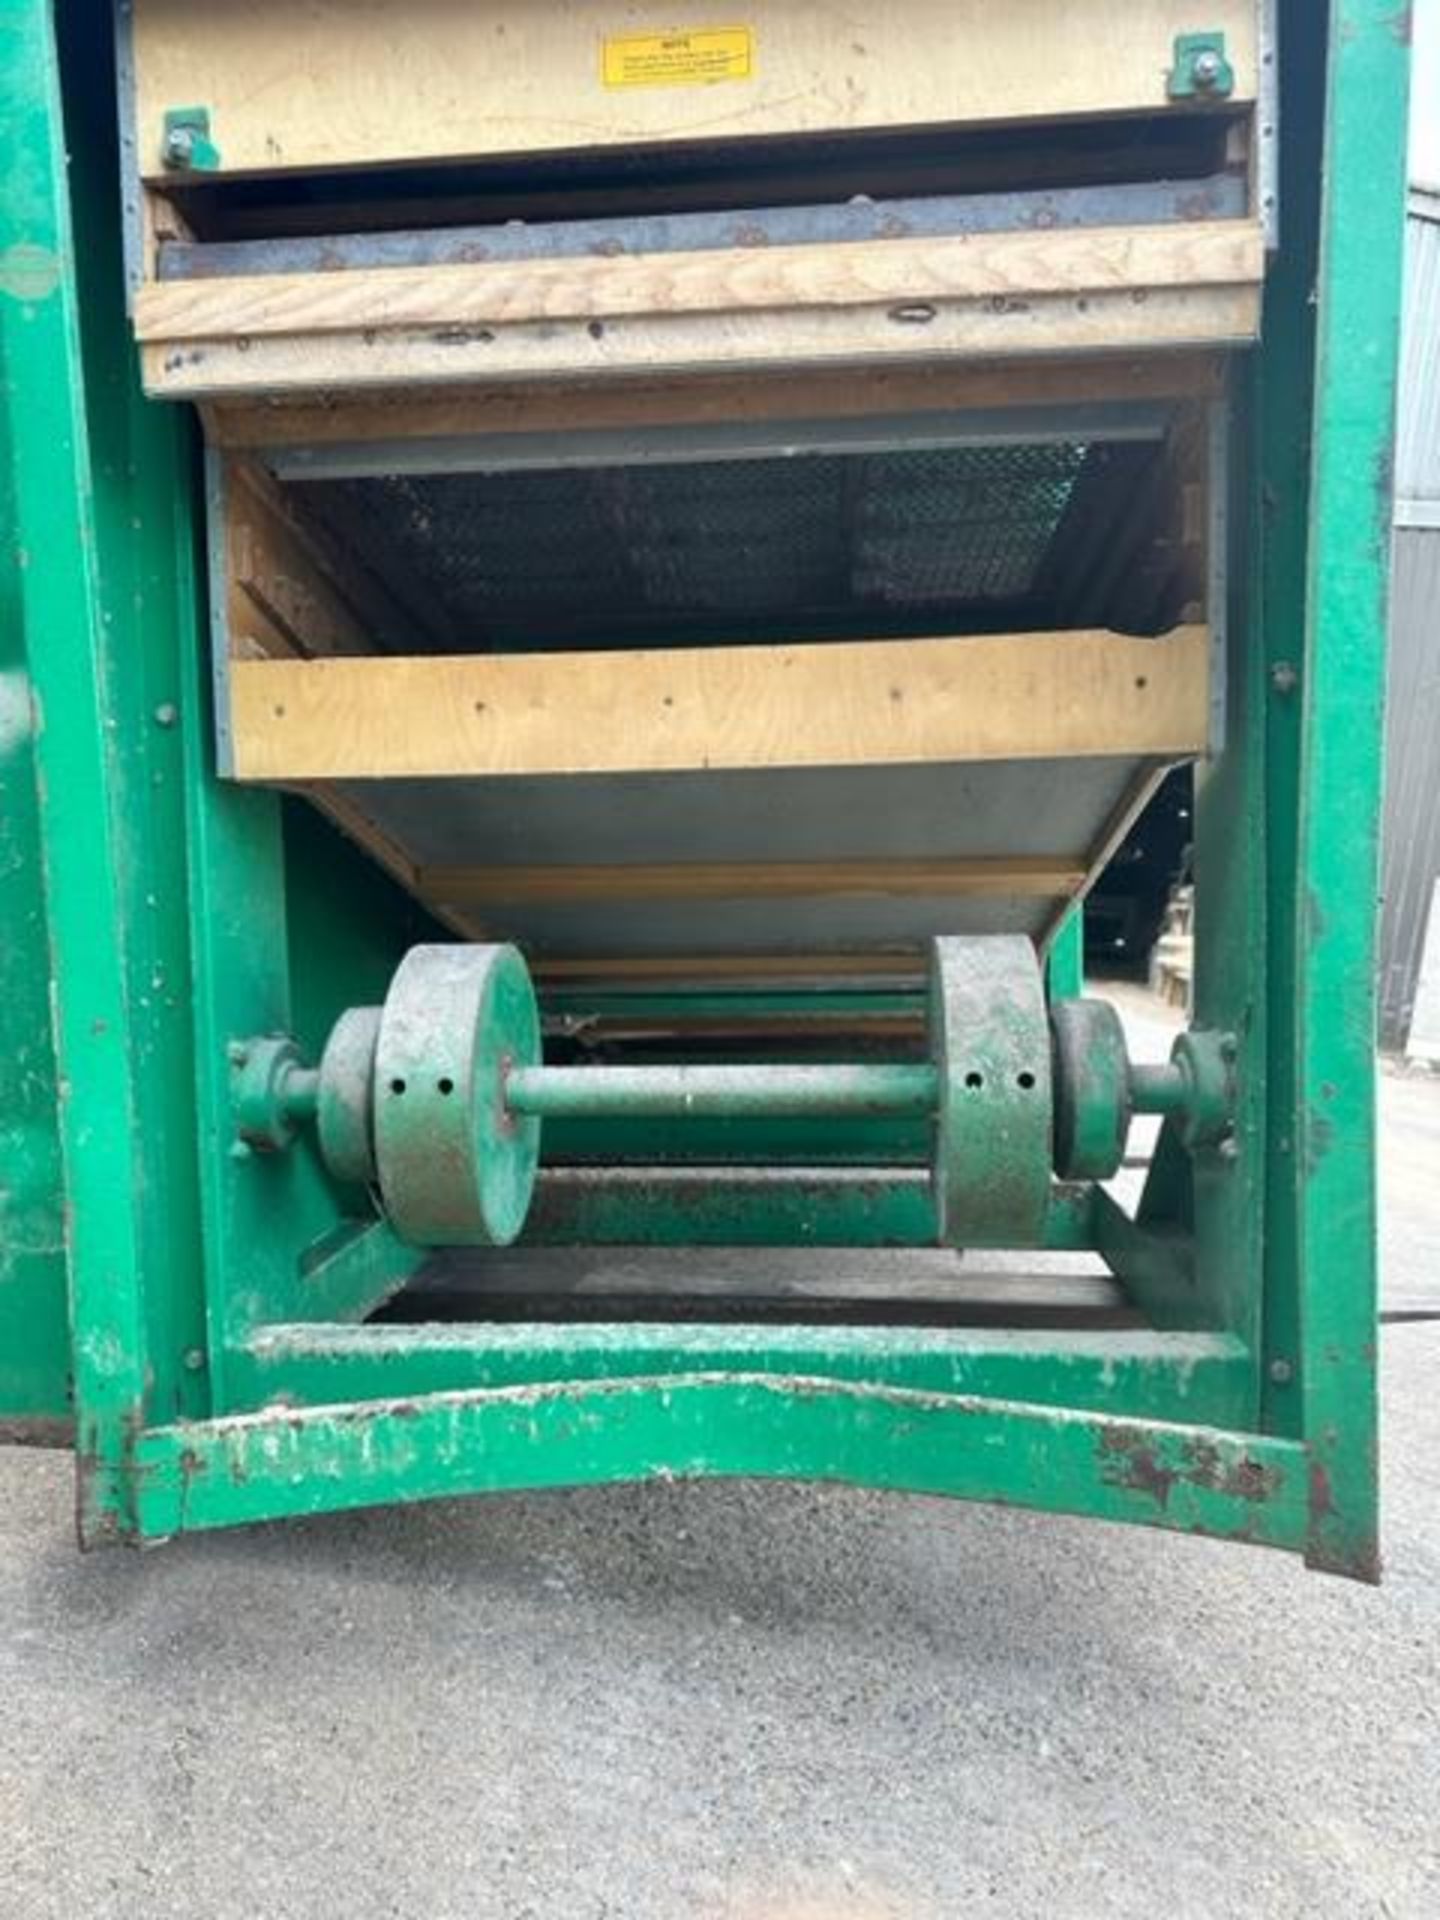 Westrup SAB-1000 Pre Cleaner Machine (no aspiration fan). Loading free of charge - yes. Lot location - Image 7 of 15